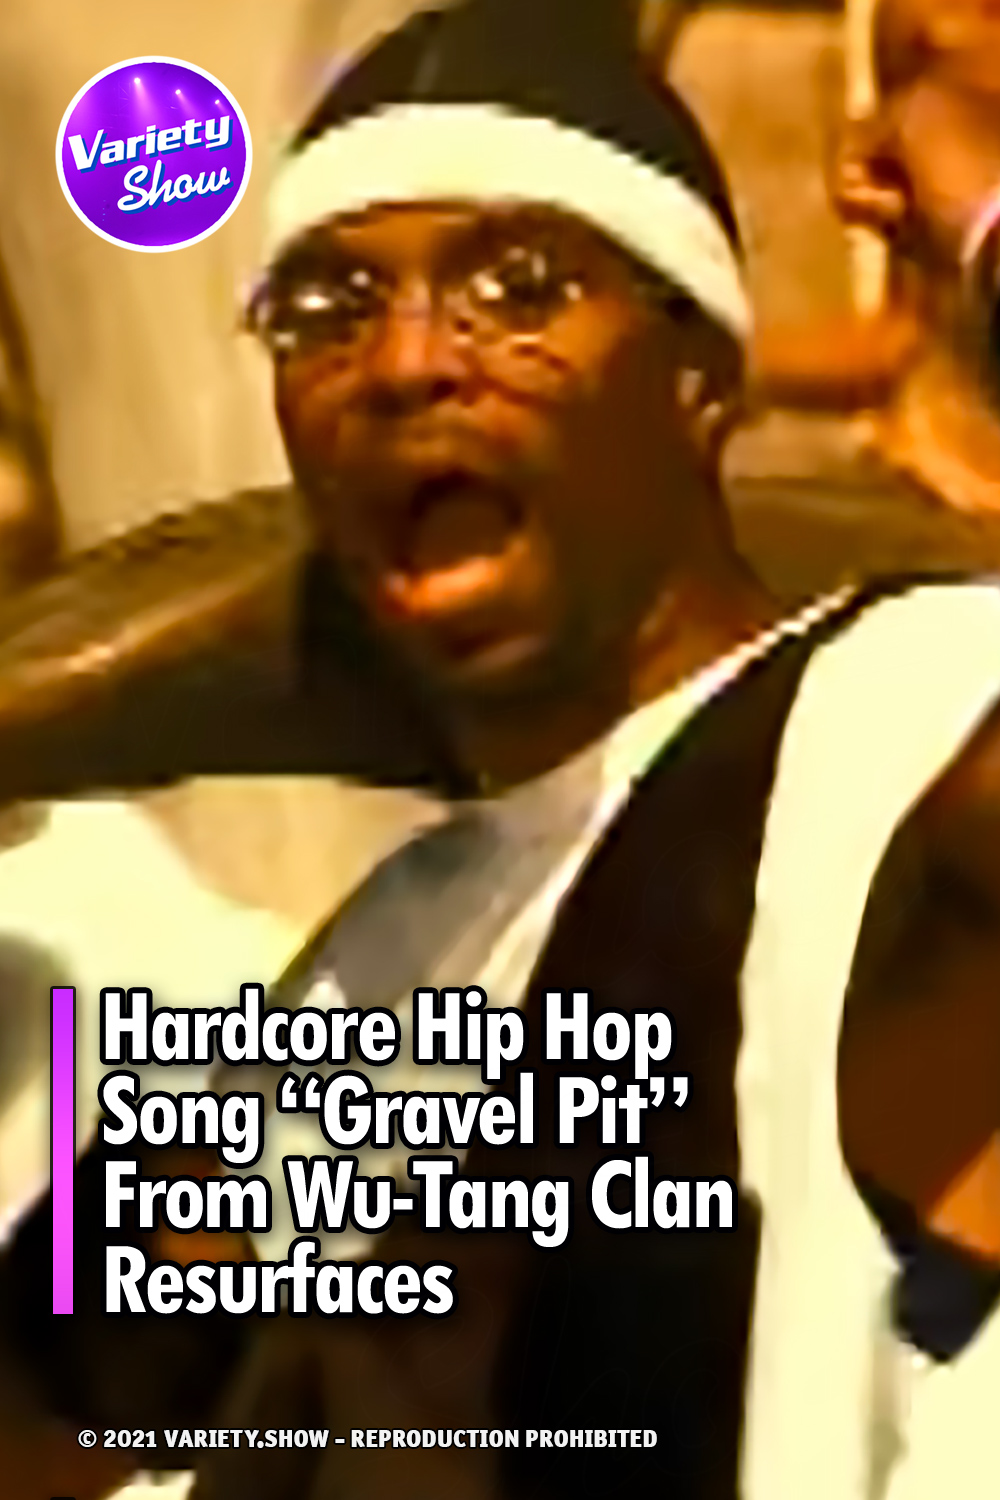 Hardcore Hip Hop Song “Gravel Pit” From Wu-Tang Clan Resurfaces